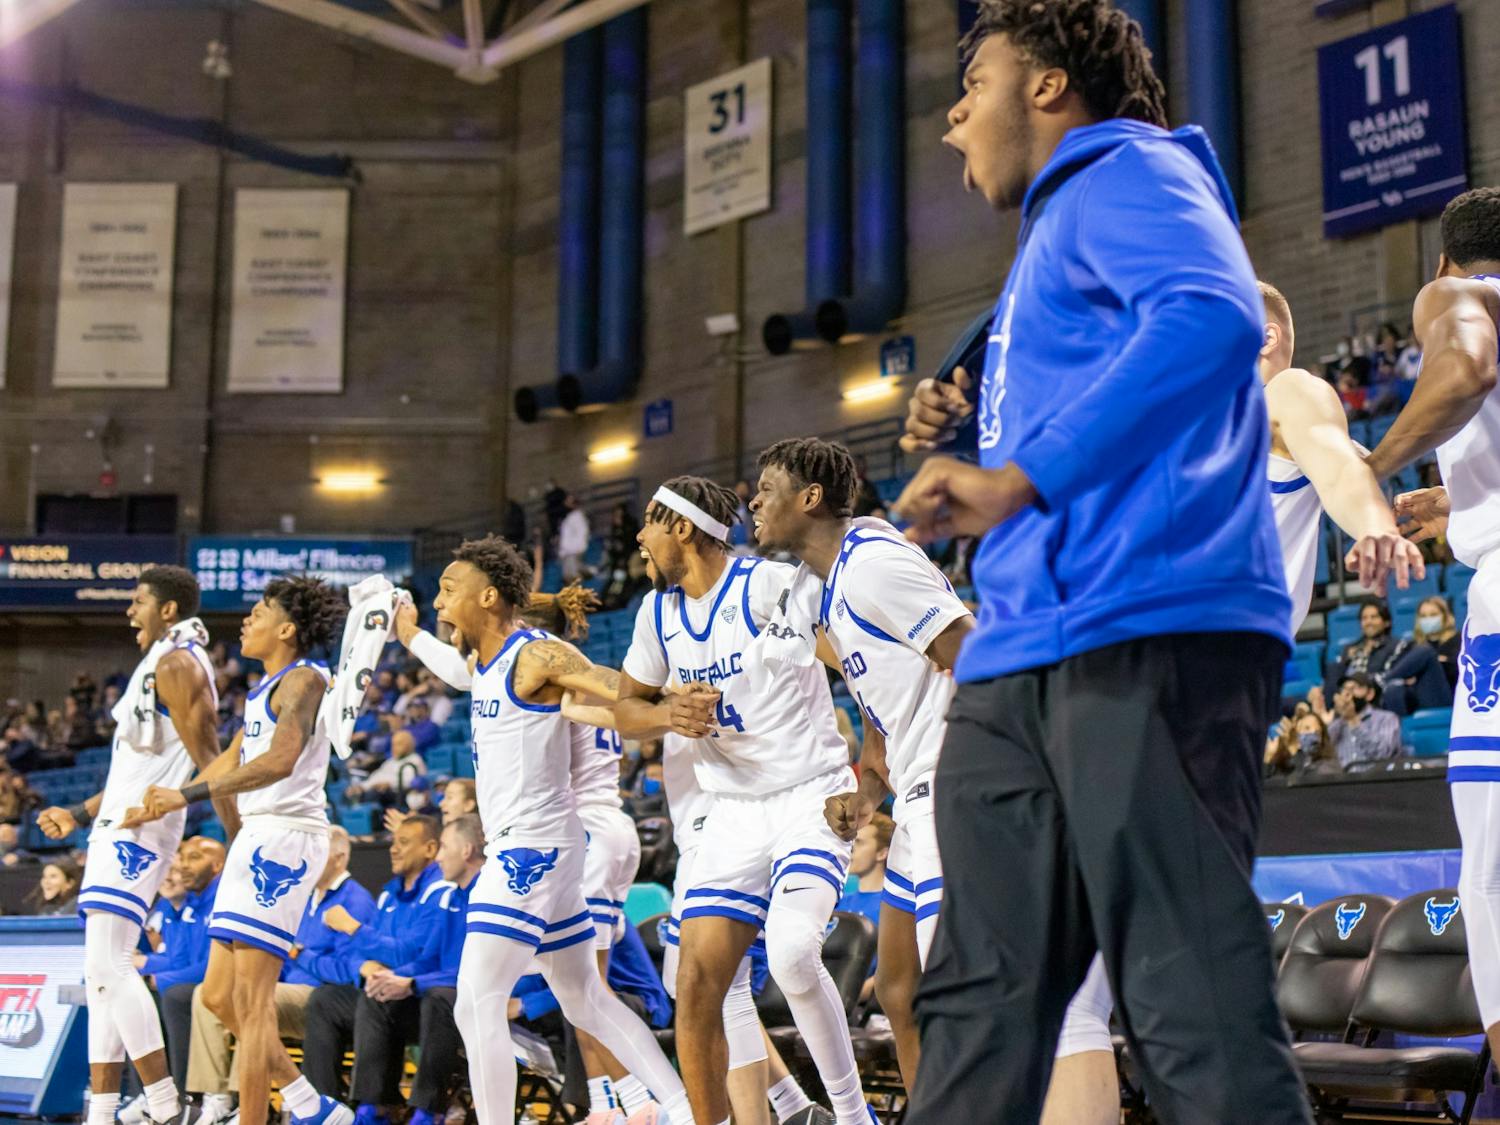 Members of the UB men’s basketball team celebrate during their 105-54 exhibition victory over Medaille Thursday.
